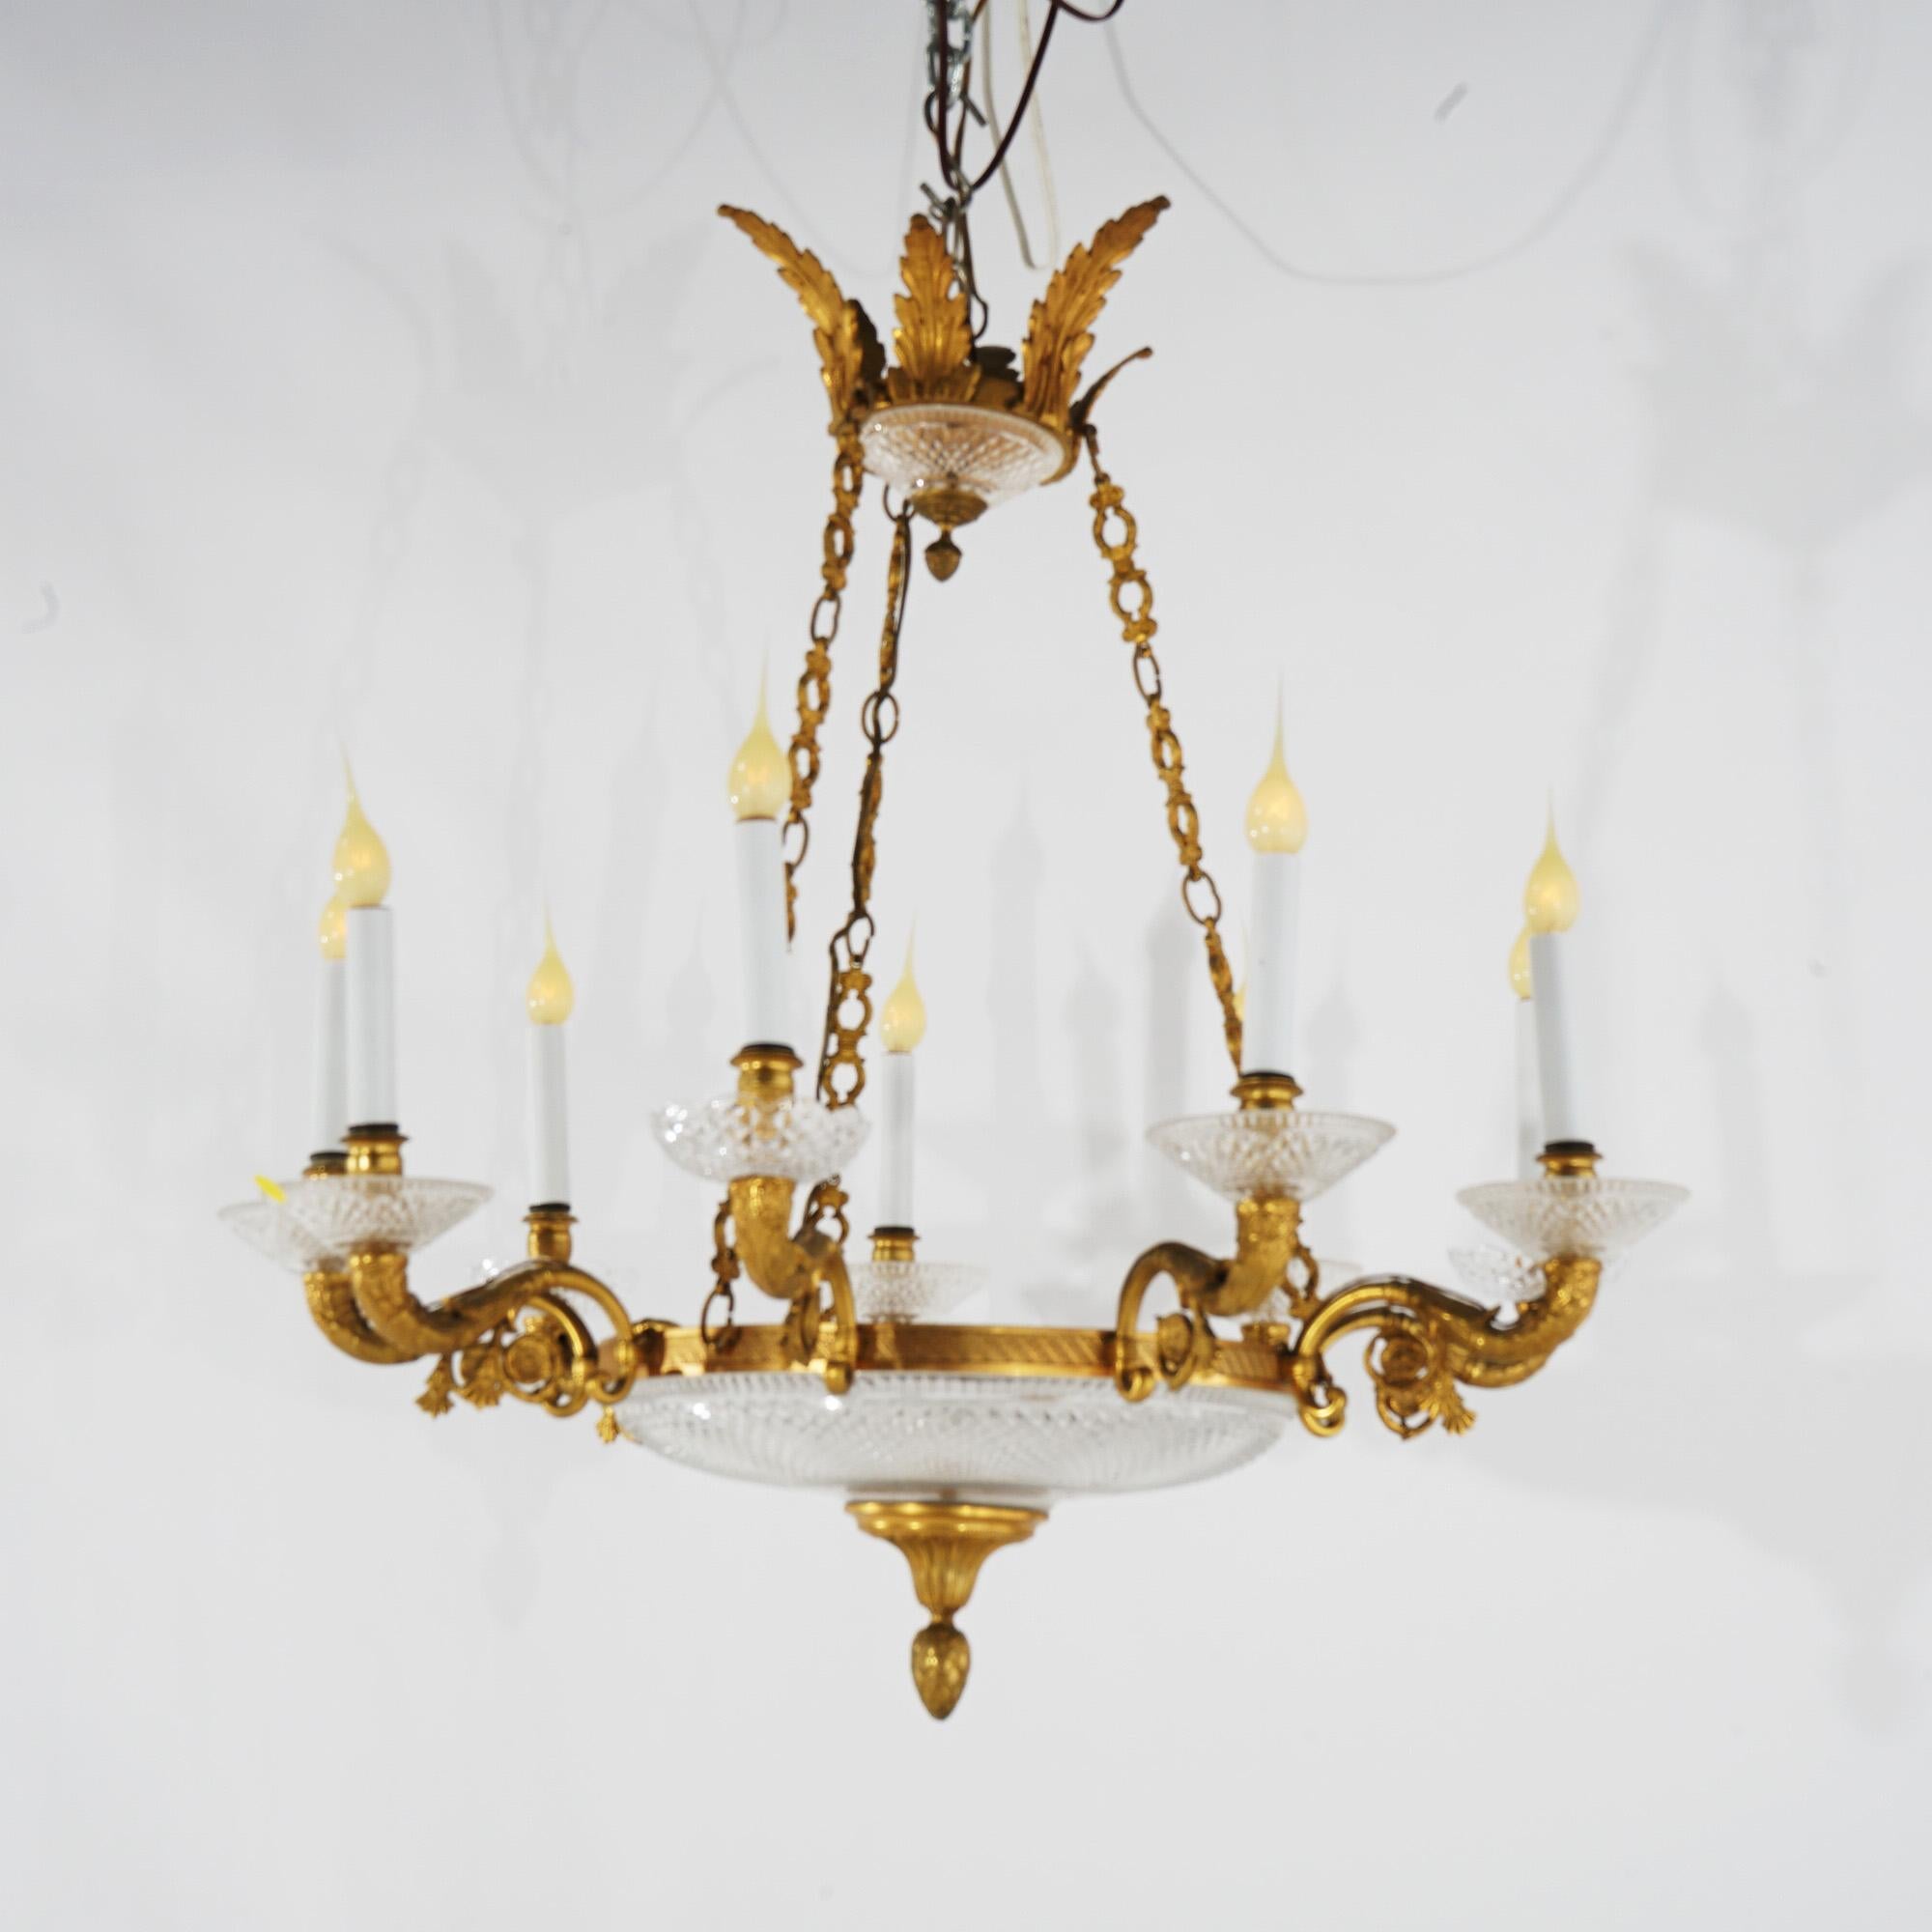 Antique French Louis XIV Style Gilt Bronze & Crystal Nine-Light Chandelier For Sale 1